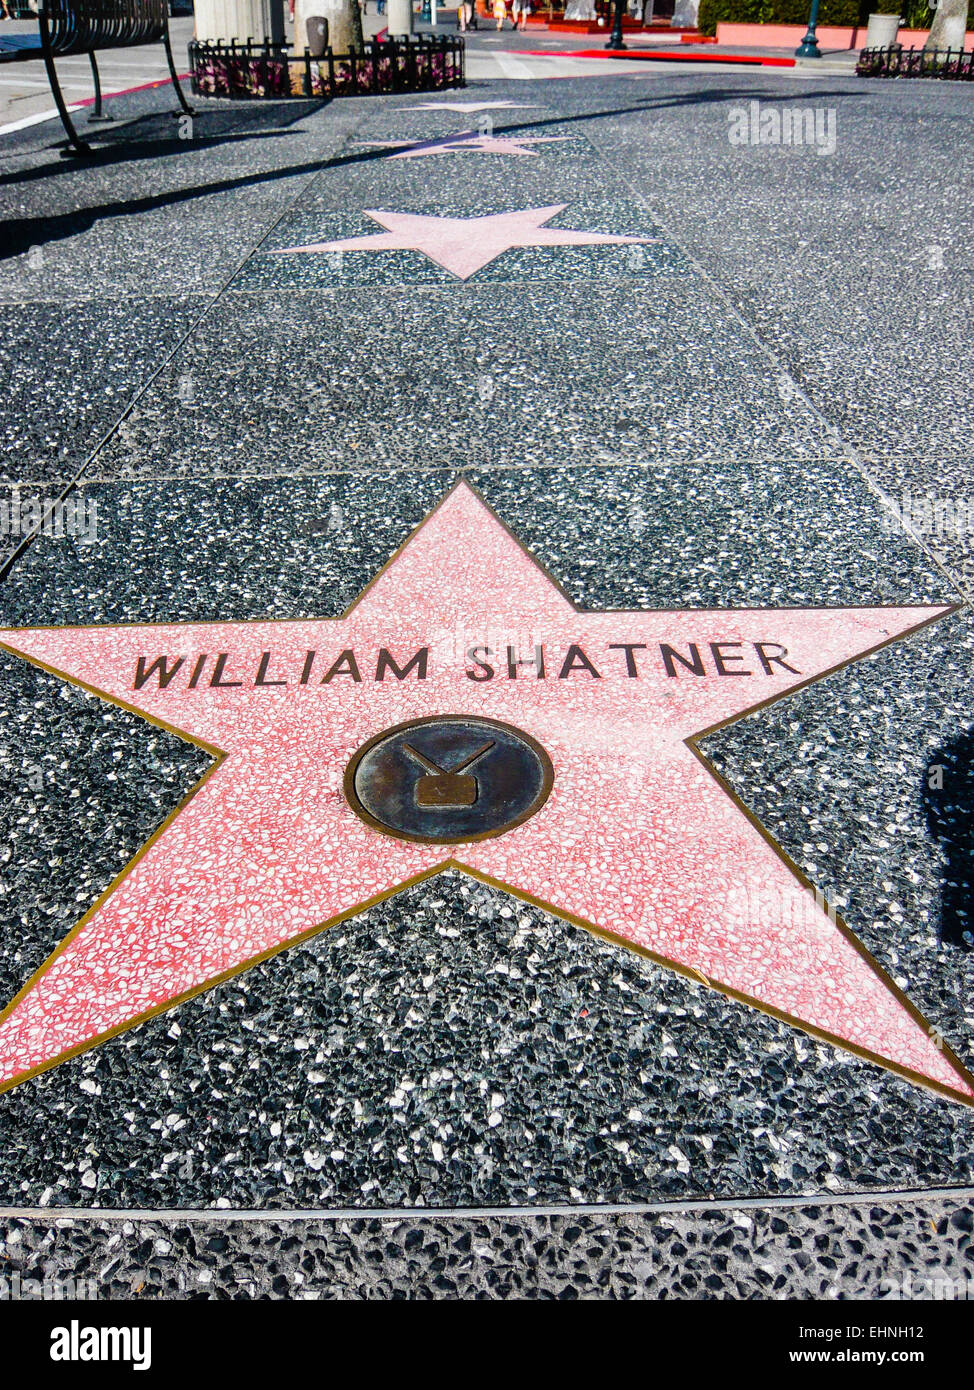 William Shatner's star on the Hollywood Walk of Fame Stock Photo